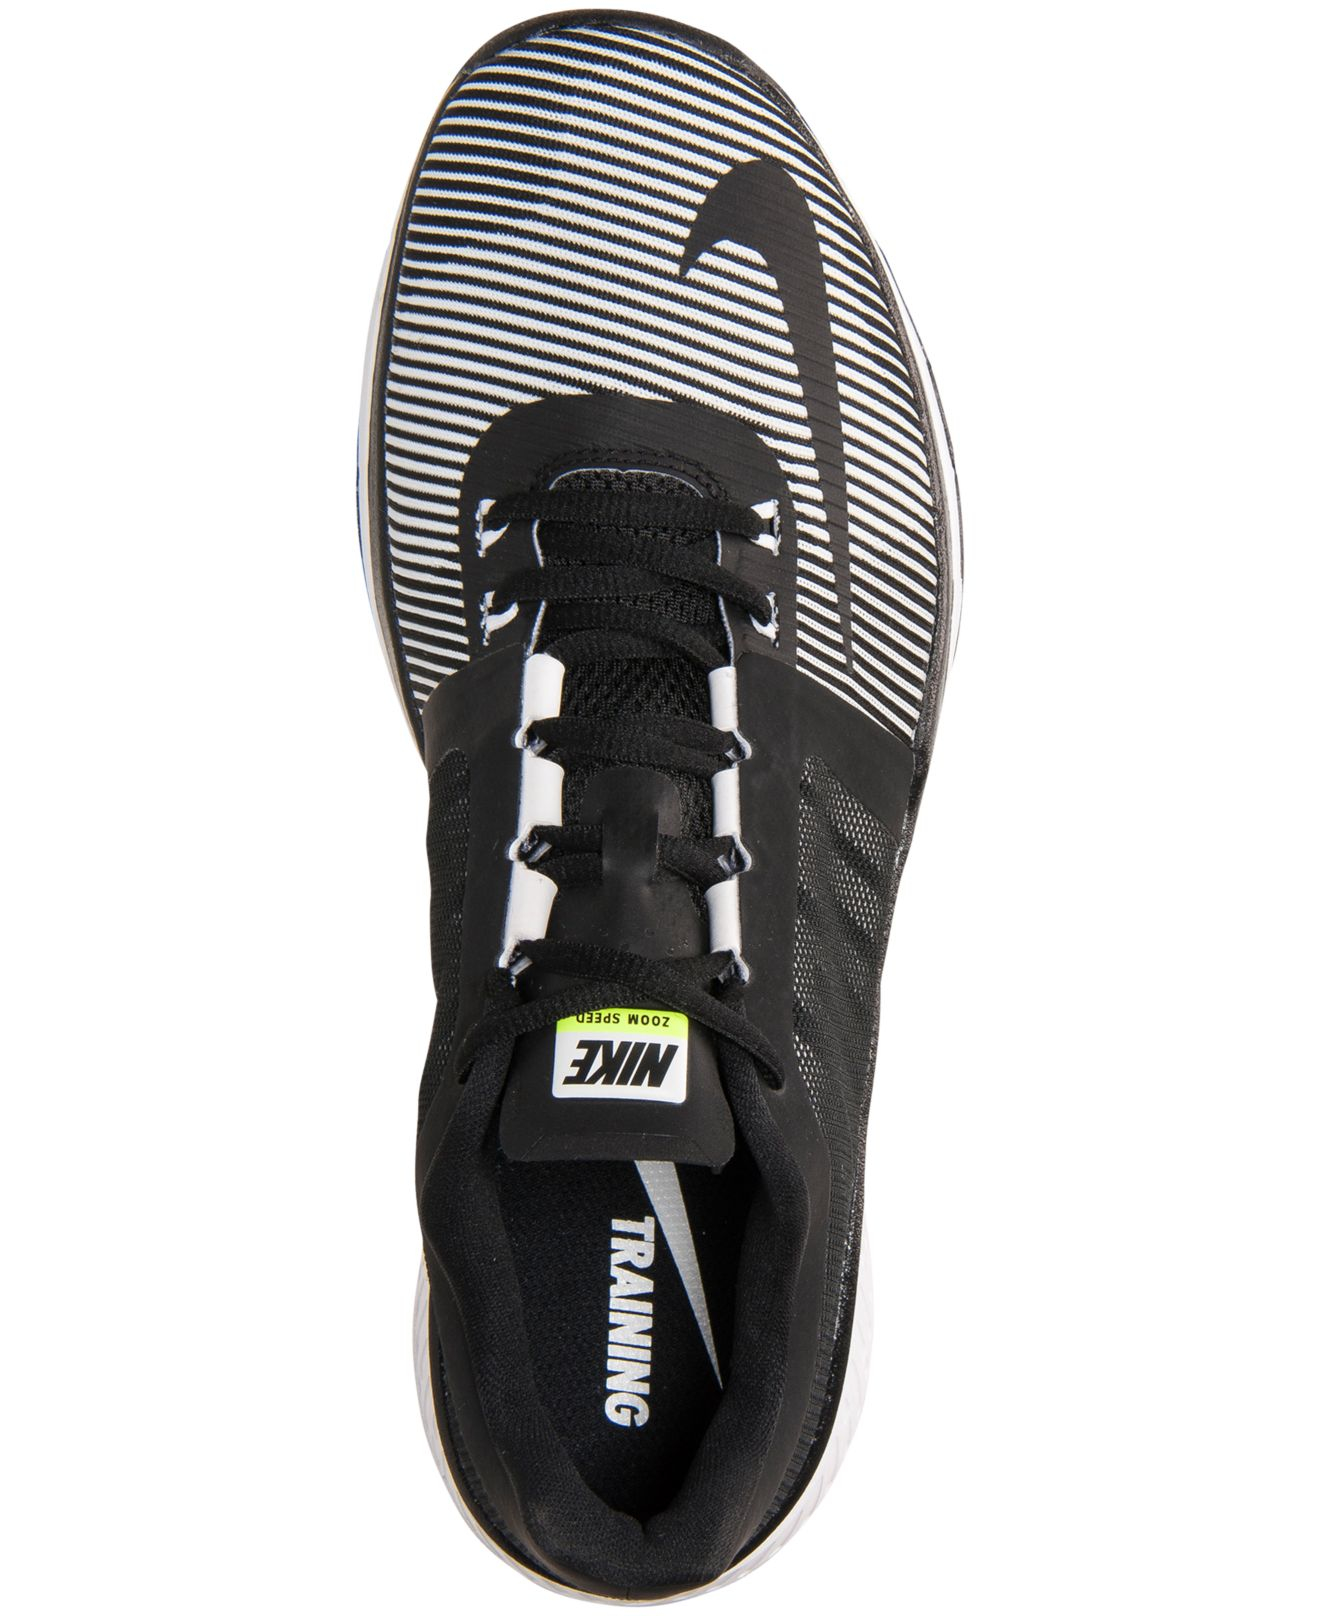 Symposium Wash windows haze Nike Men's Zoom Speed Tr 2015 Training Sneakers From Finish Line in Black  for Men | Lyst